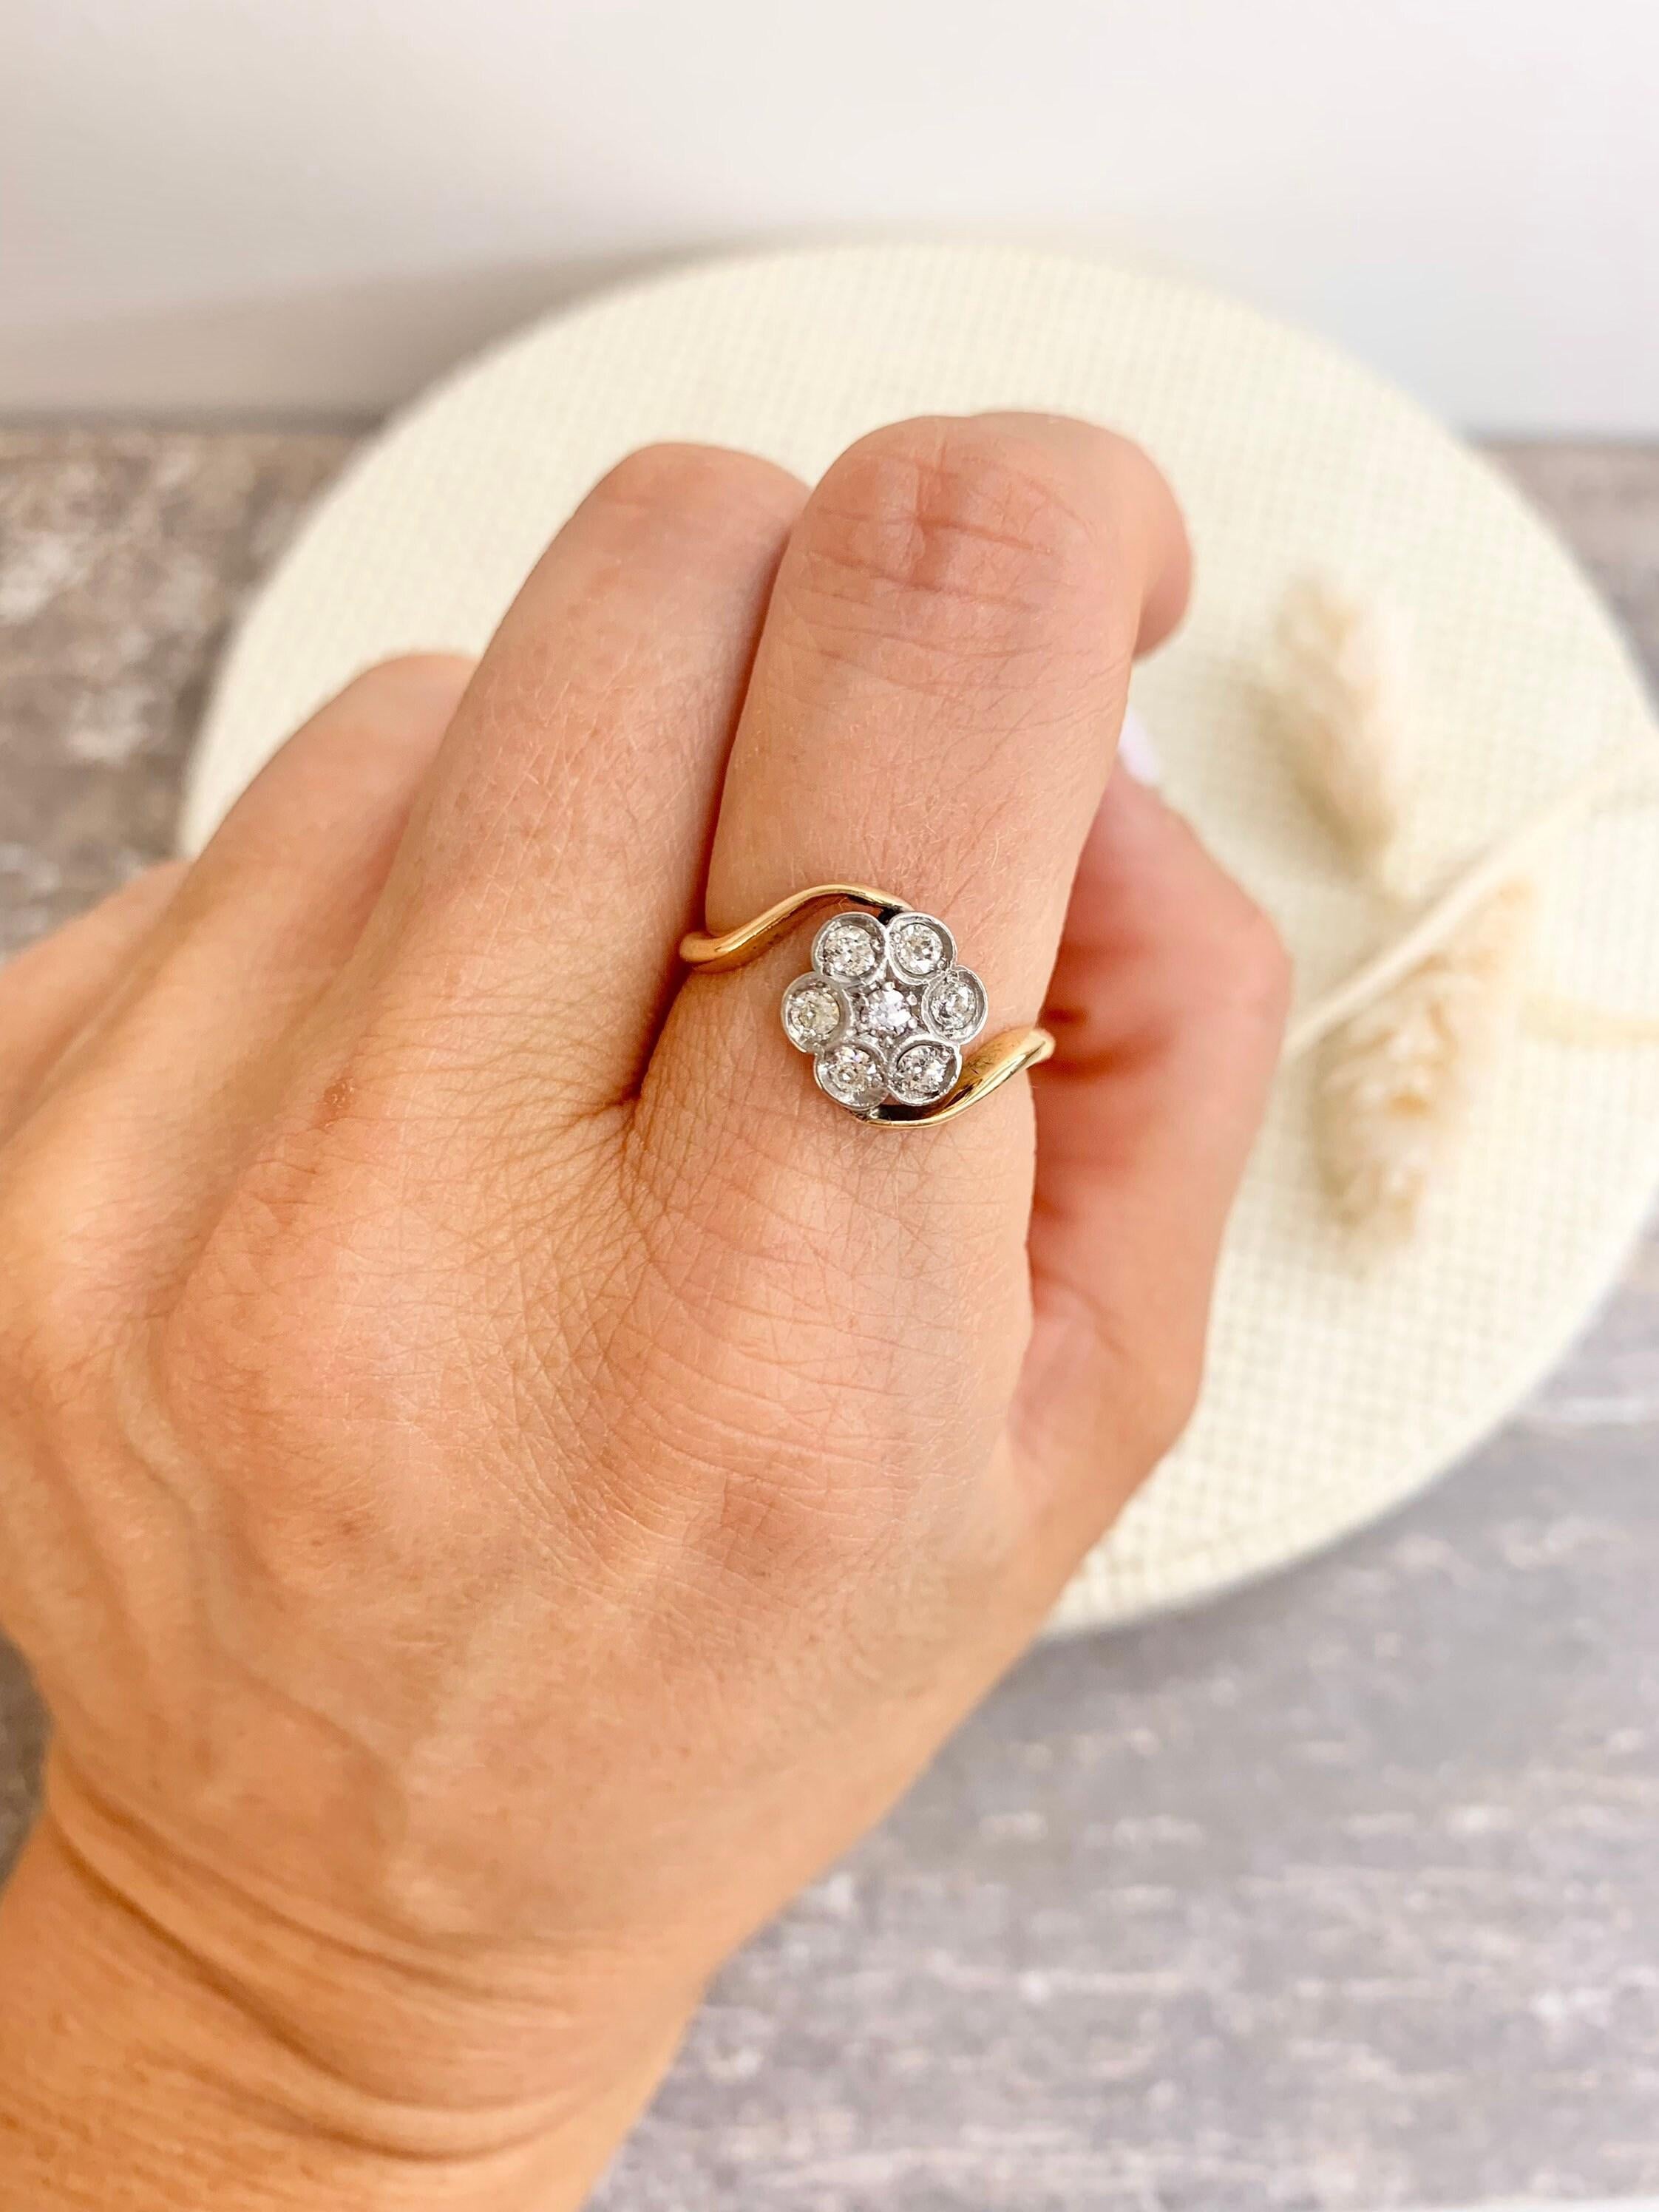 Antique Diamond Daisy Ring 

18ct Gold & Platinum 

Edwardian Circa 1910

Beautiful Diamond Daisy Ring in a Crossover Setting 

Diamonds Weight Approx 0.35carats

In our opinion they are H/I colour and SI clarity

Diameter of the daisy measures